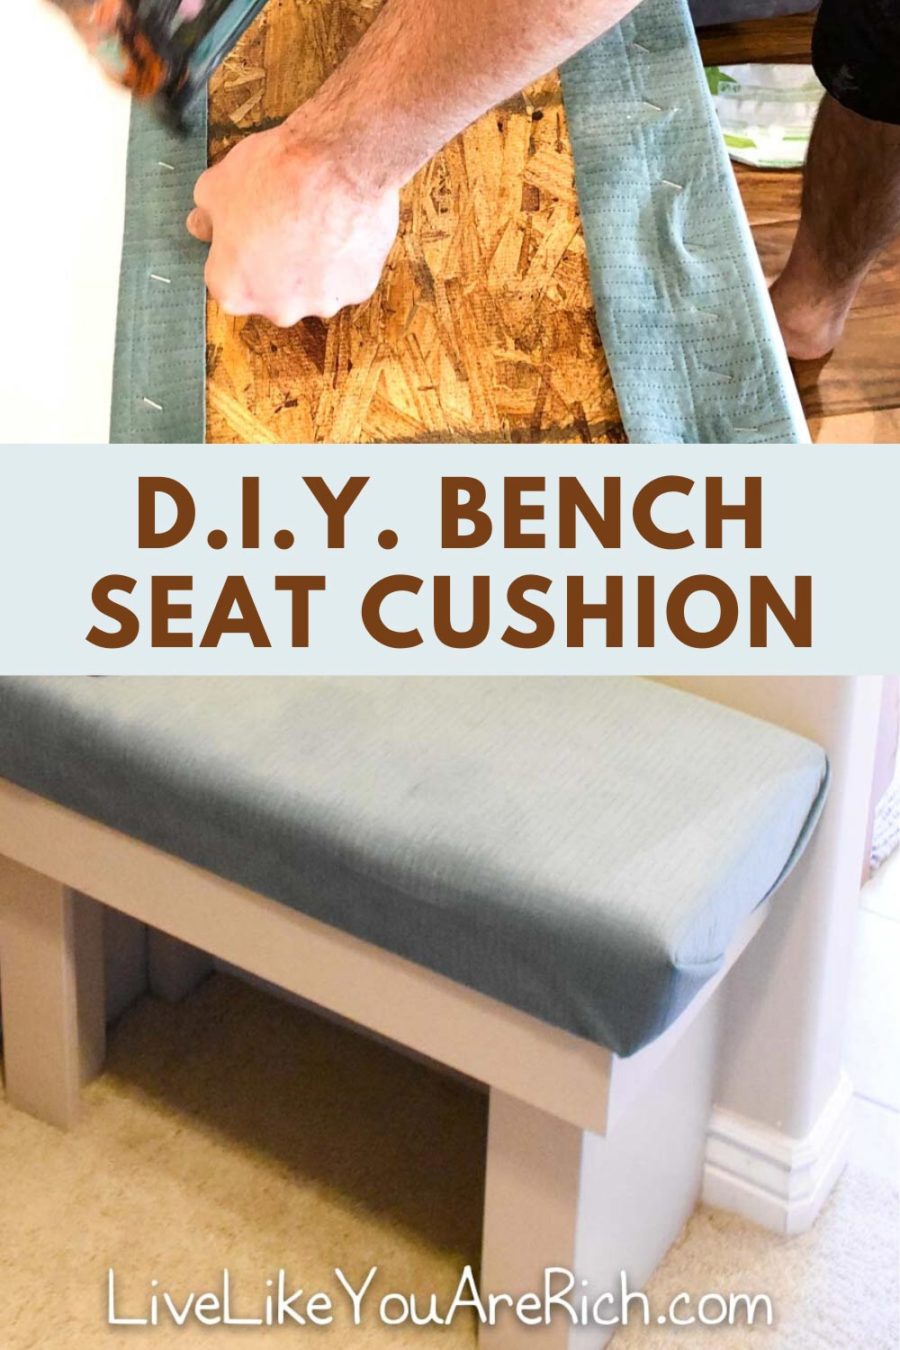 Making a DIY Bench Seat Cushion was super easy to do! After gathering the materials, it only took me about 15 minutes to make. I know you can make one too. #diy #bench #seatcushion